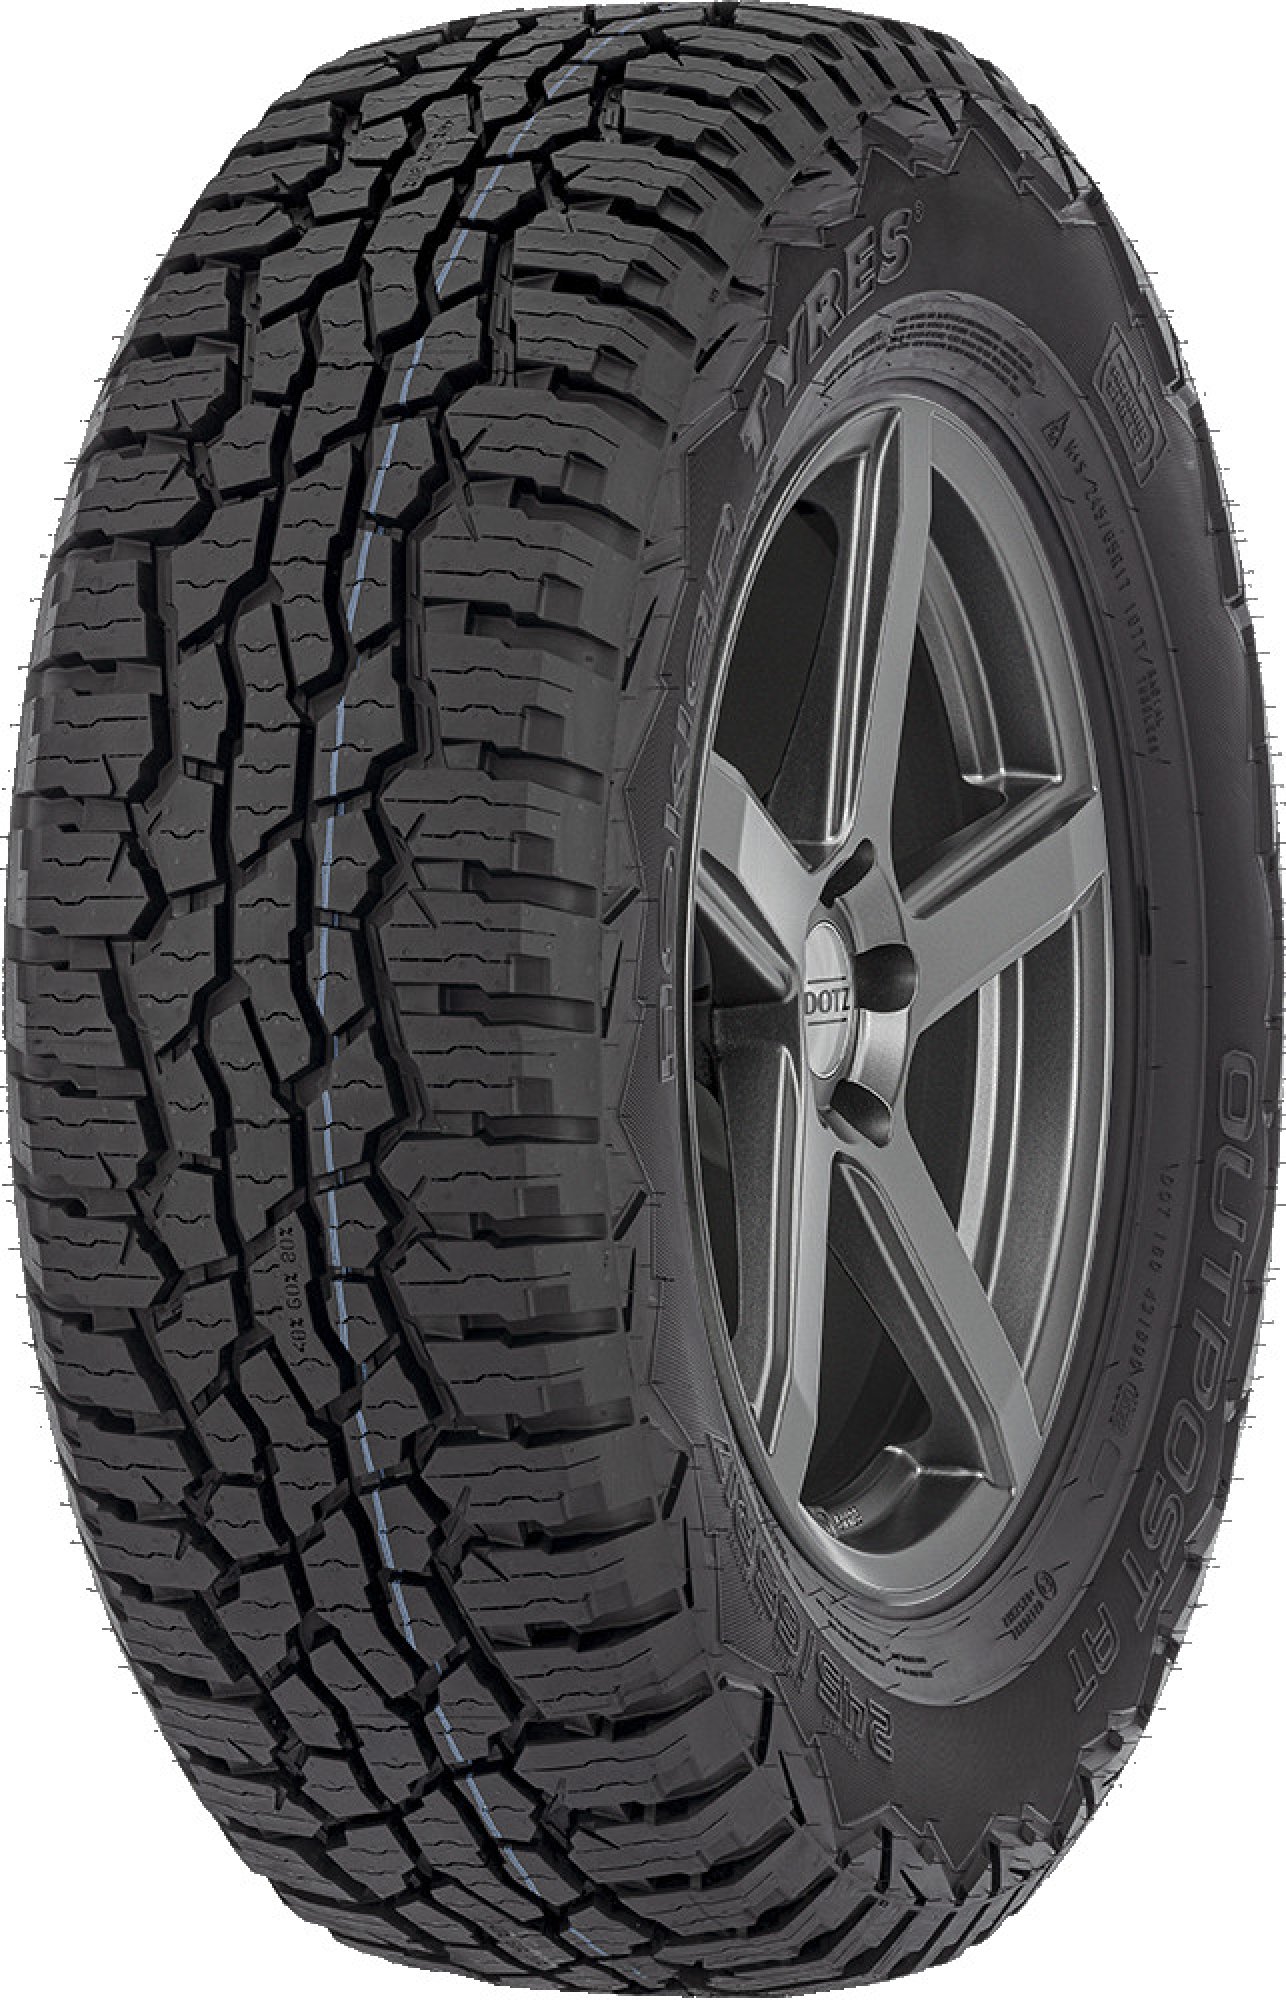 NOKIAN TYRES OUTPOST AT 225/70 R 16 107T